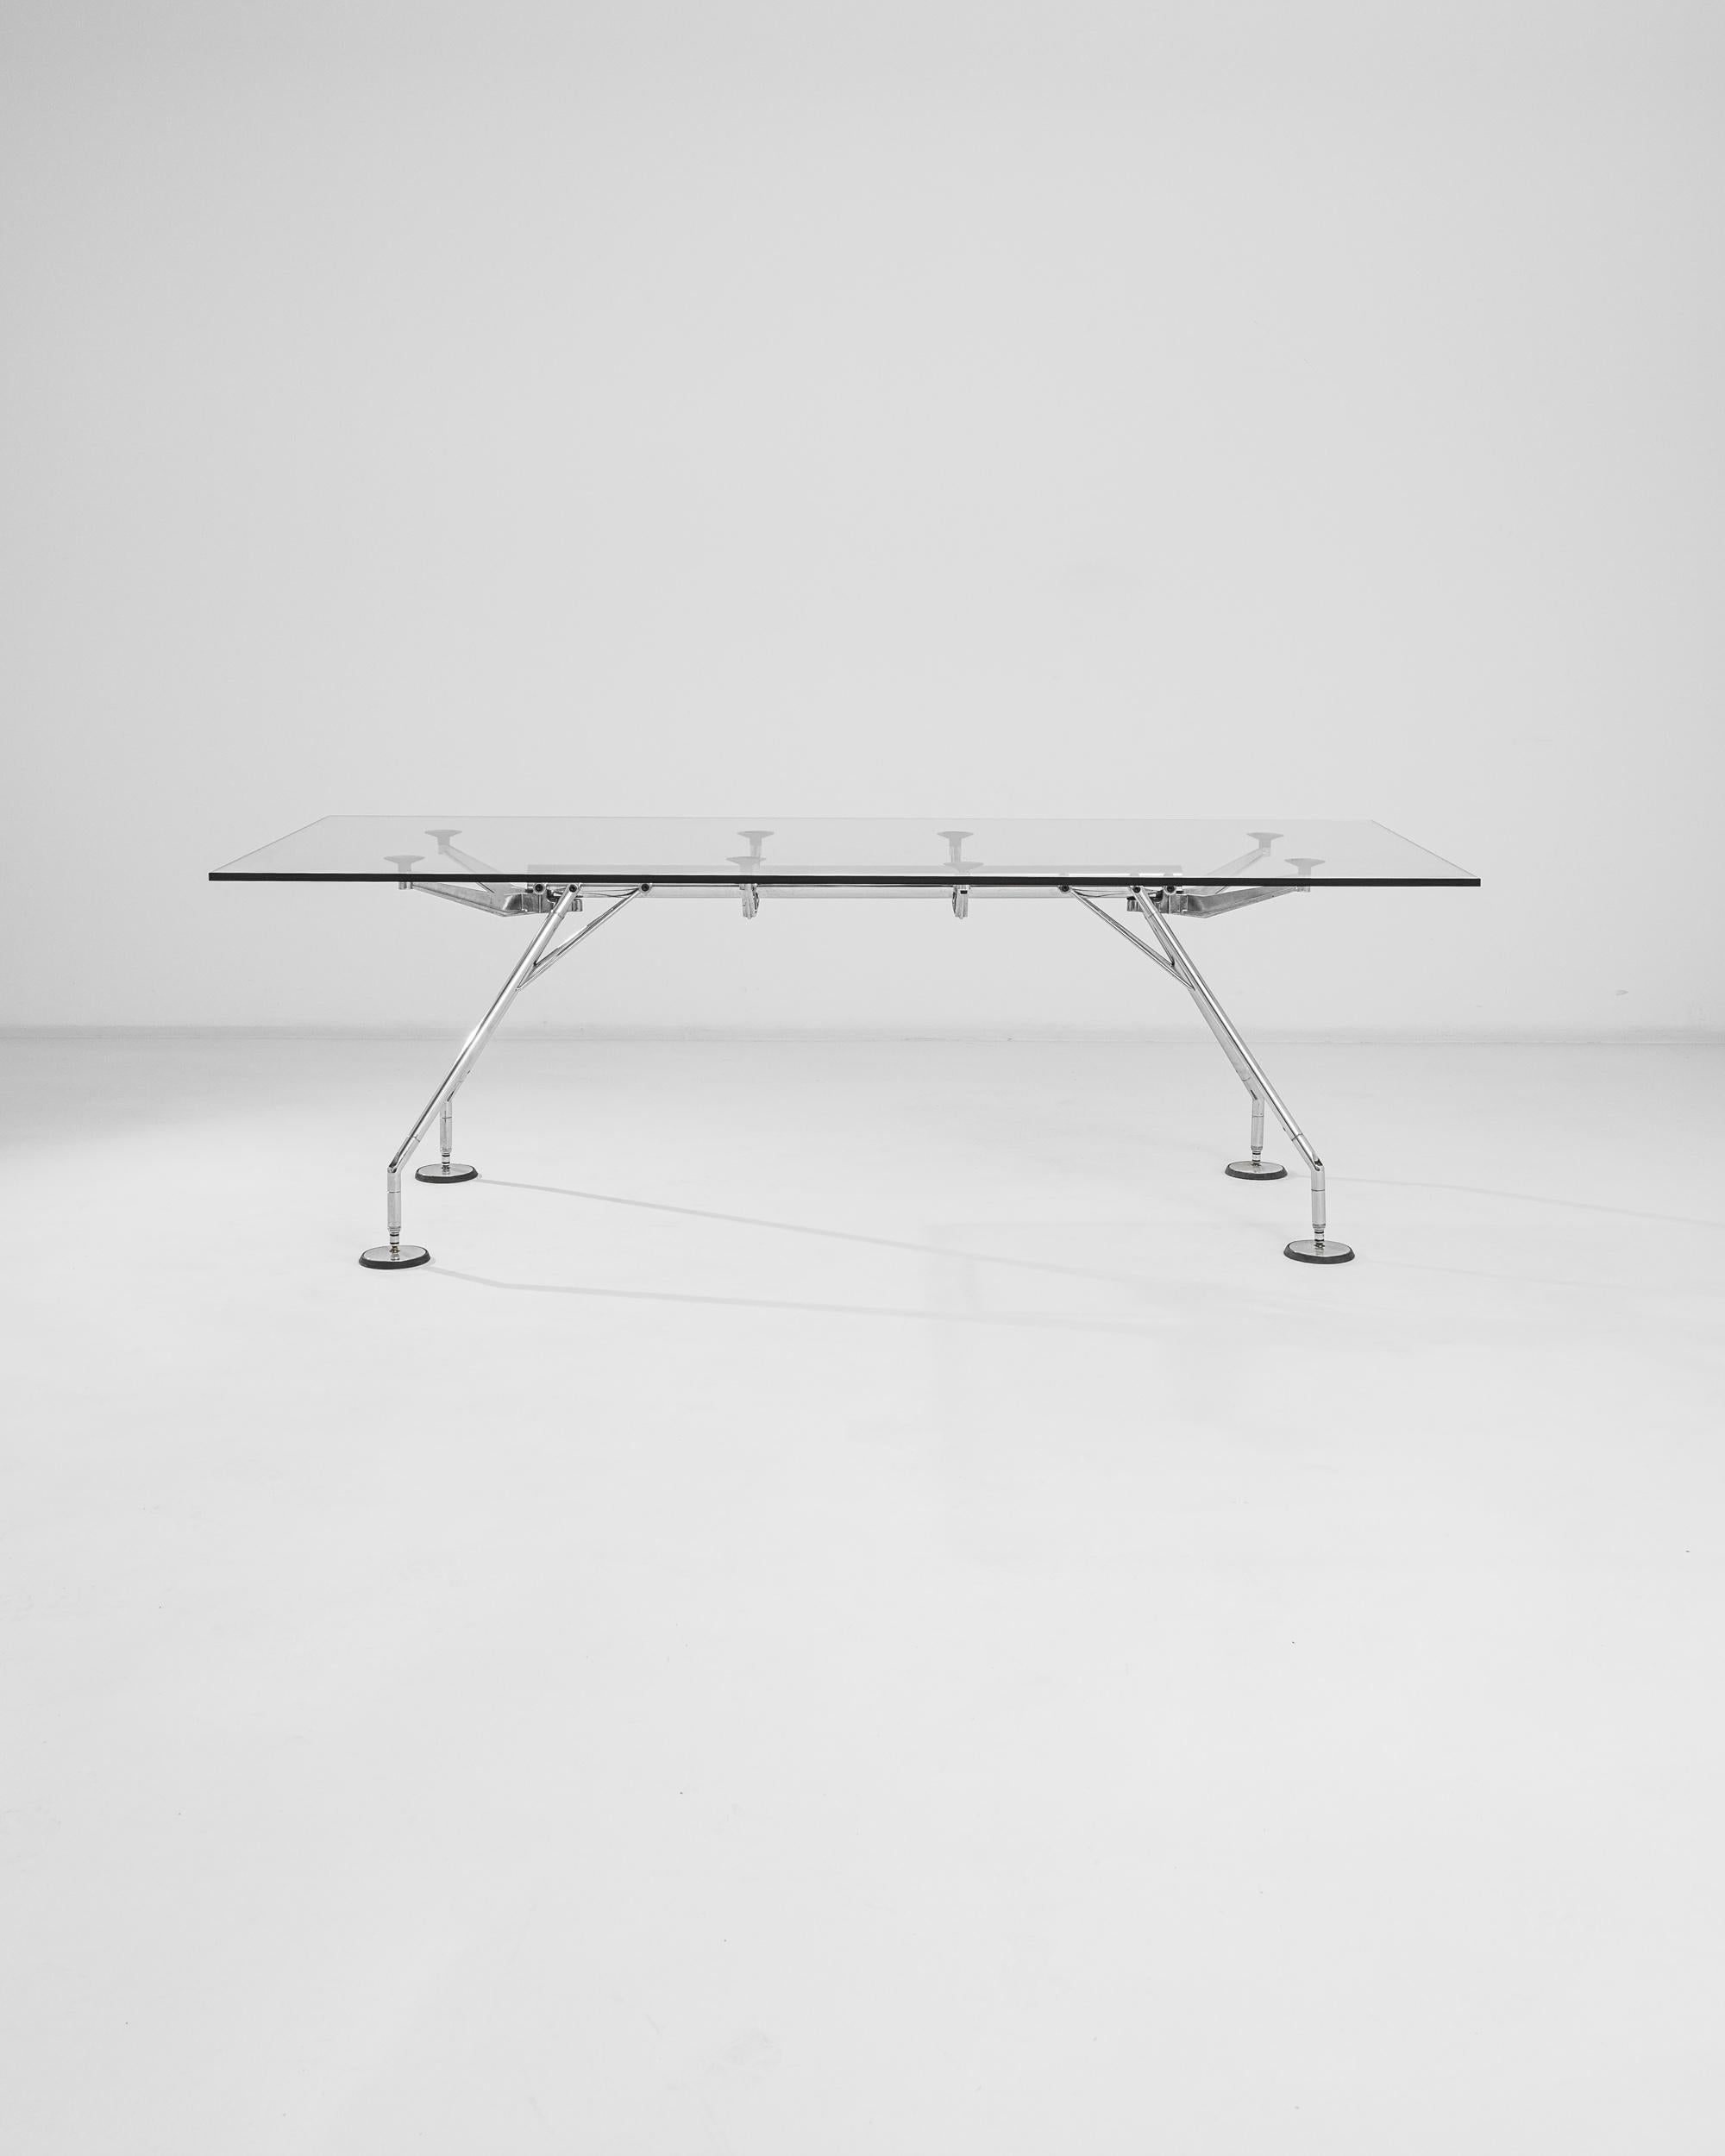 Made in Italy, this metal and glass table was imagined by designer and architect, Norman Foster, a premiere force in high-tech design. A network of metal appendages, capped with circular ends supports a thick glass top and sets this table sturdily